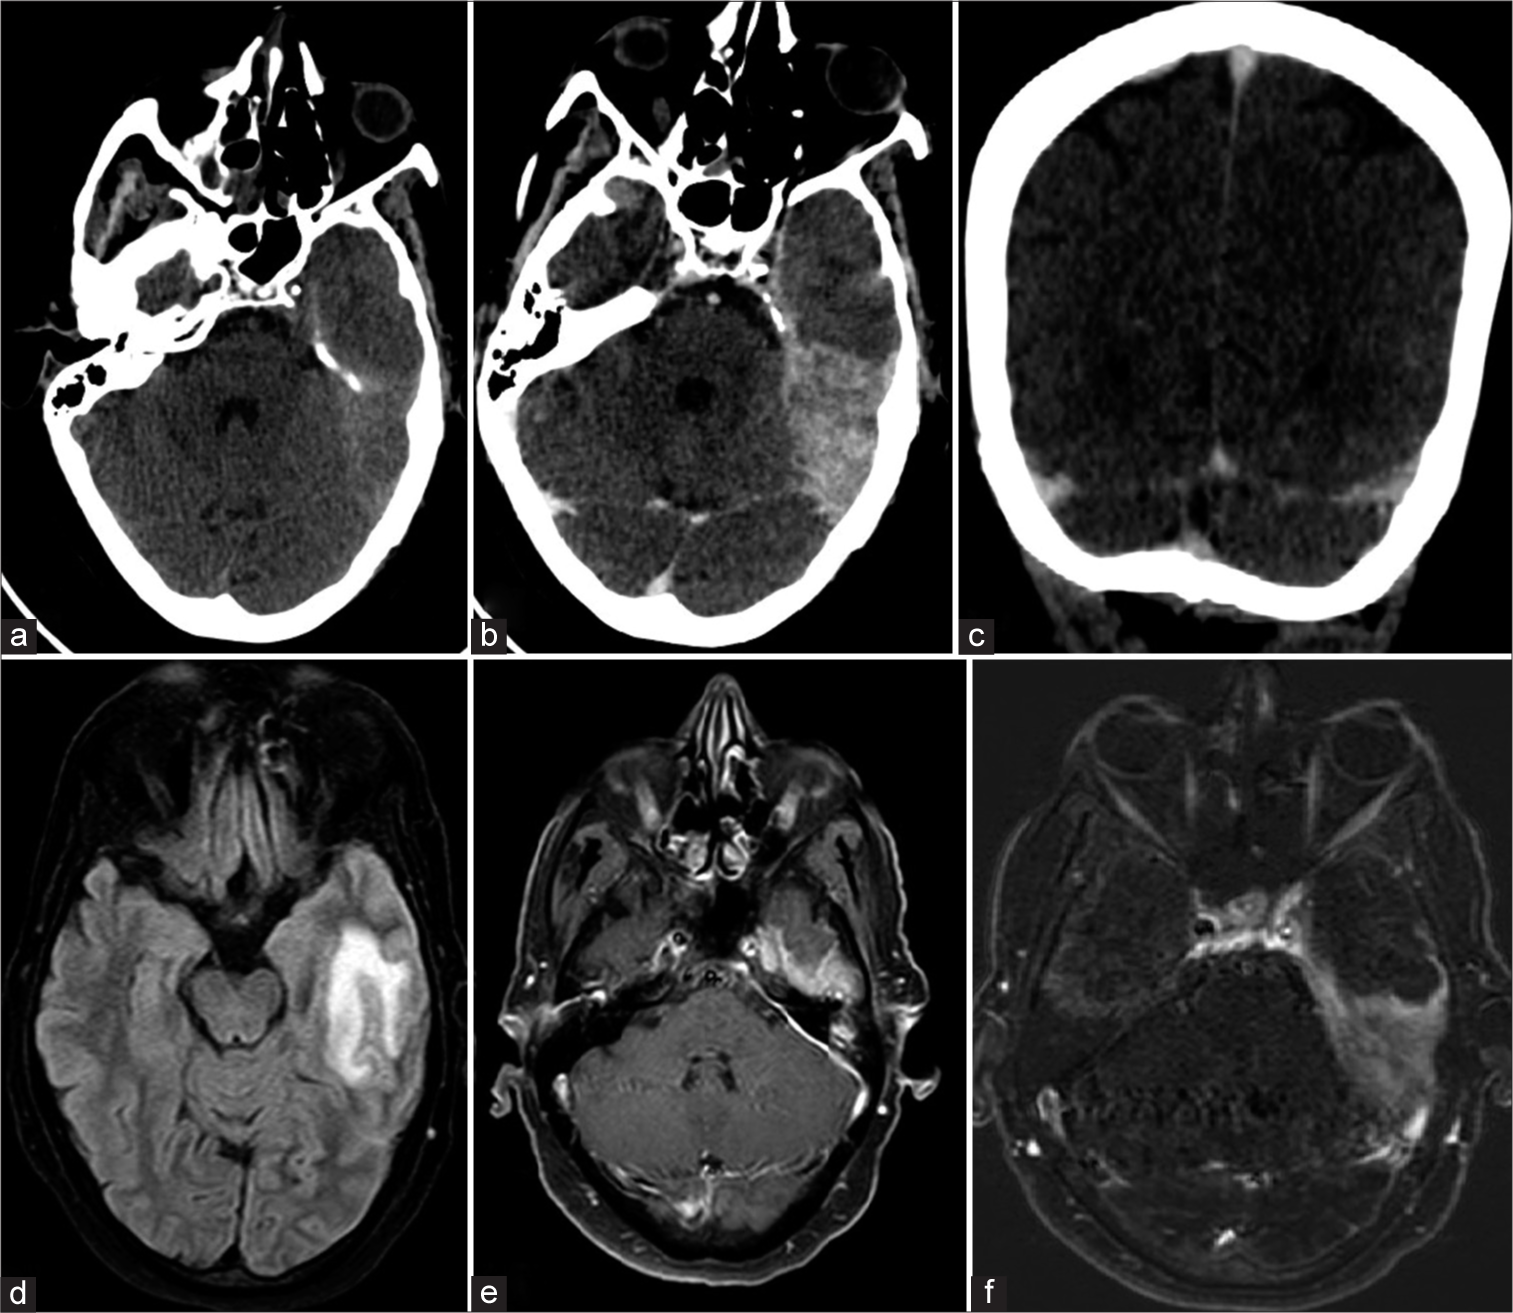 Computed tomography (CT) brain plain (a) and contrast (b) axial sections show thick hyperdense left tentorium cerebelli with post-contrast enhancement and minimal left temporal lobe edema. CT contrast coronal (c) section shows no evidence of enhancing mass lesions or dural venous sinus thrombosis. Magnetic resonance imaging (MRI) of brain flair (d) axial section shows hyperintensity in the left temporal lobe. MRI brain T1 gadolinium contrast (e) and T1 post-contrast subtracted image (f) axial section shows focal abnormal pachymeningeal thickening and enhancement in the left temporal region.